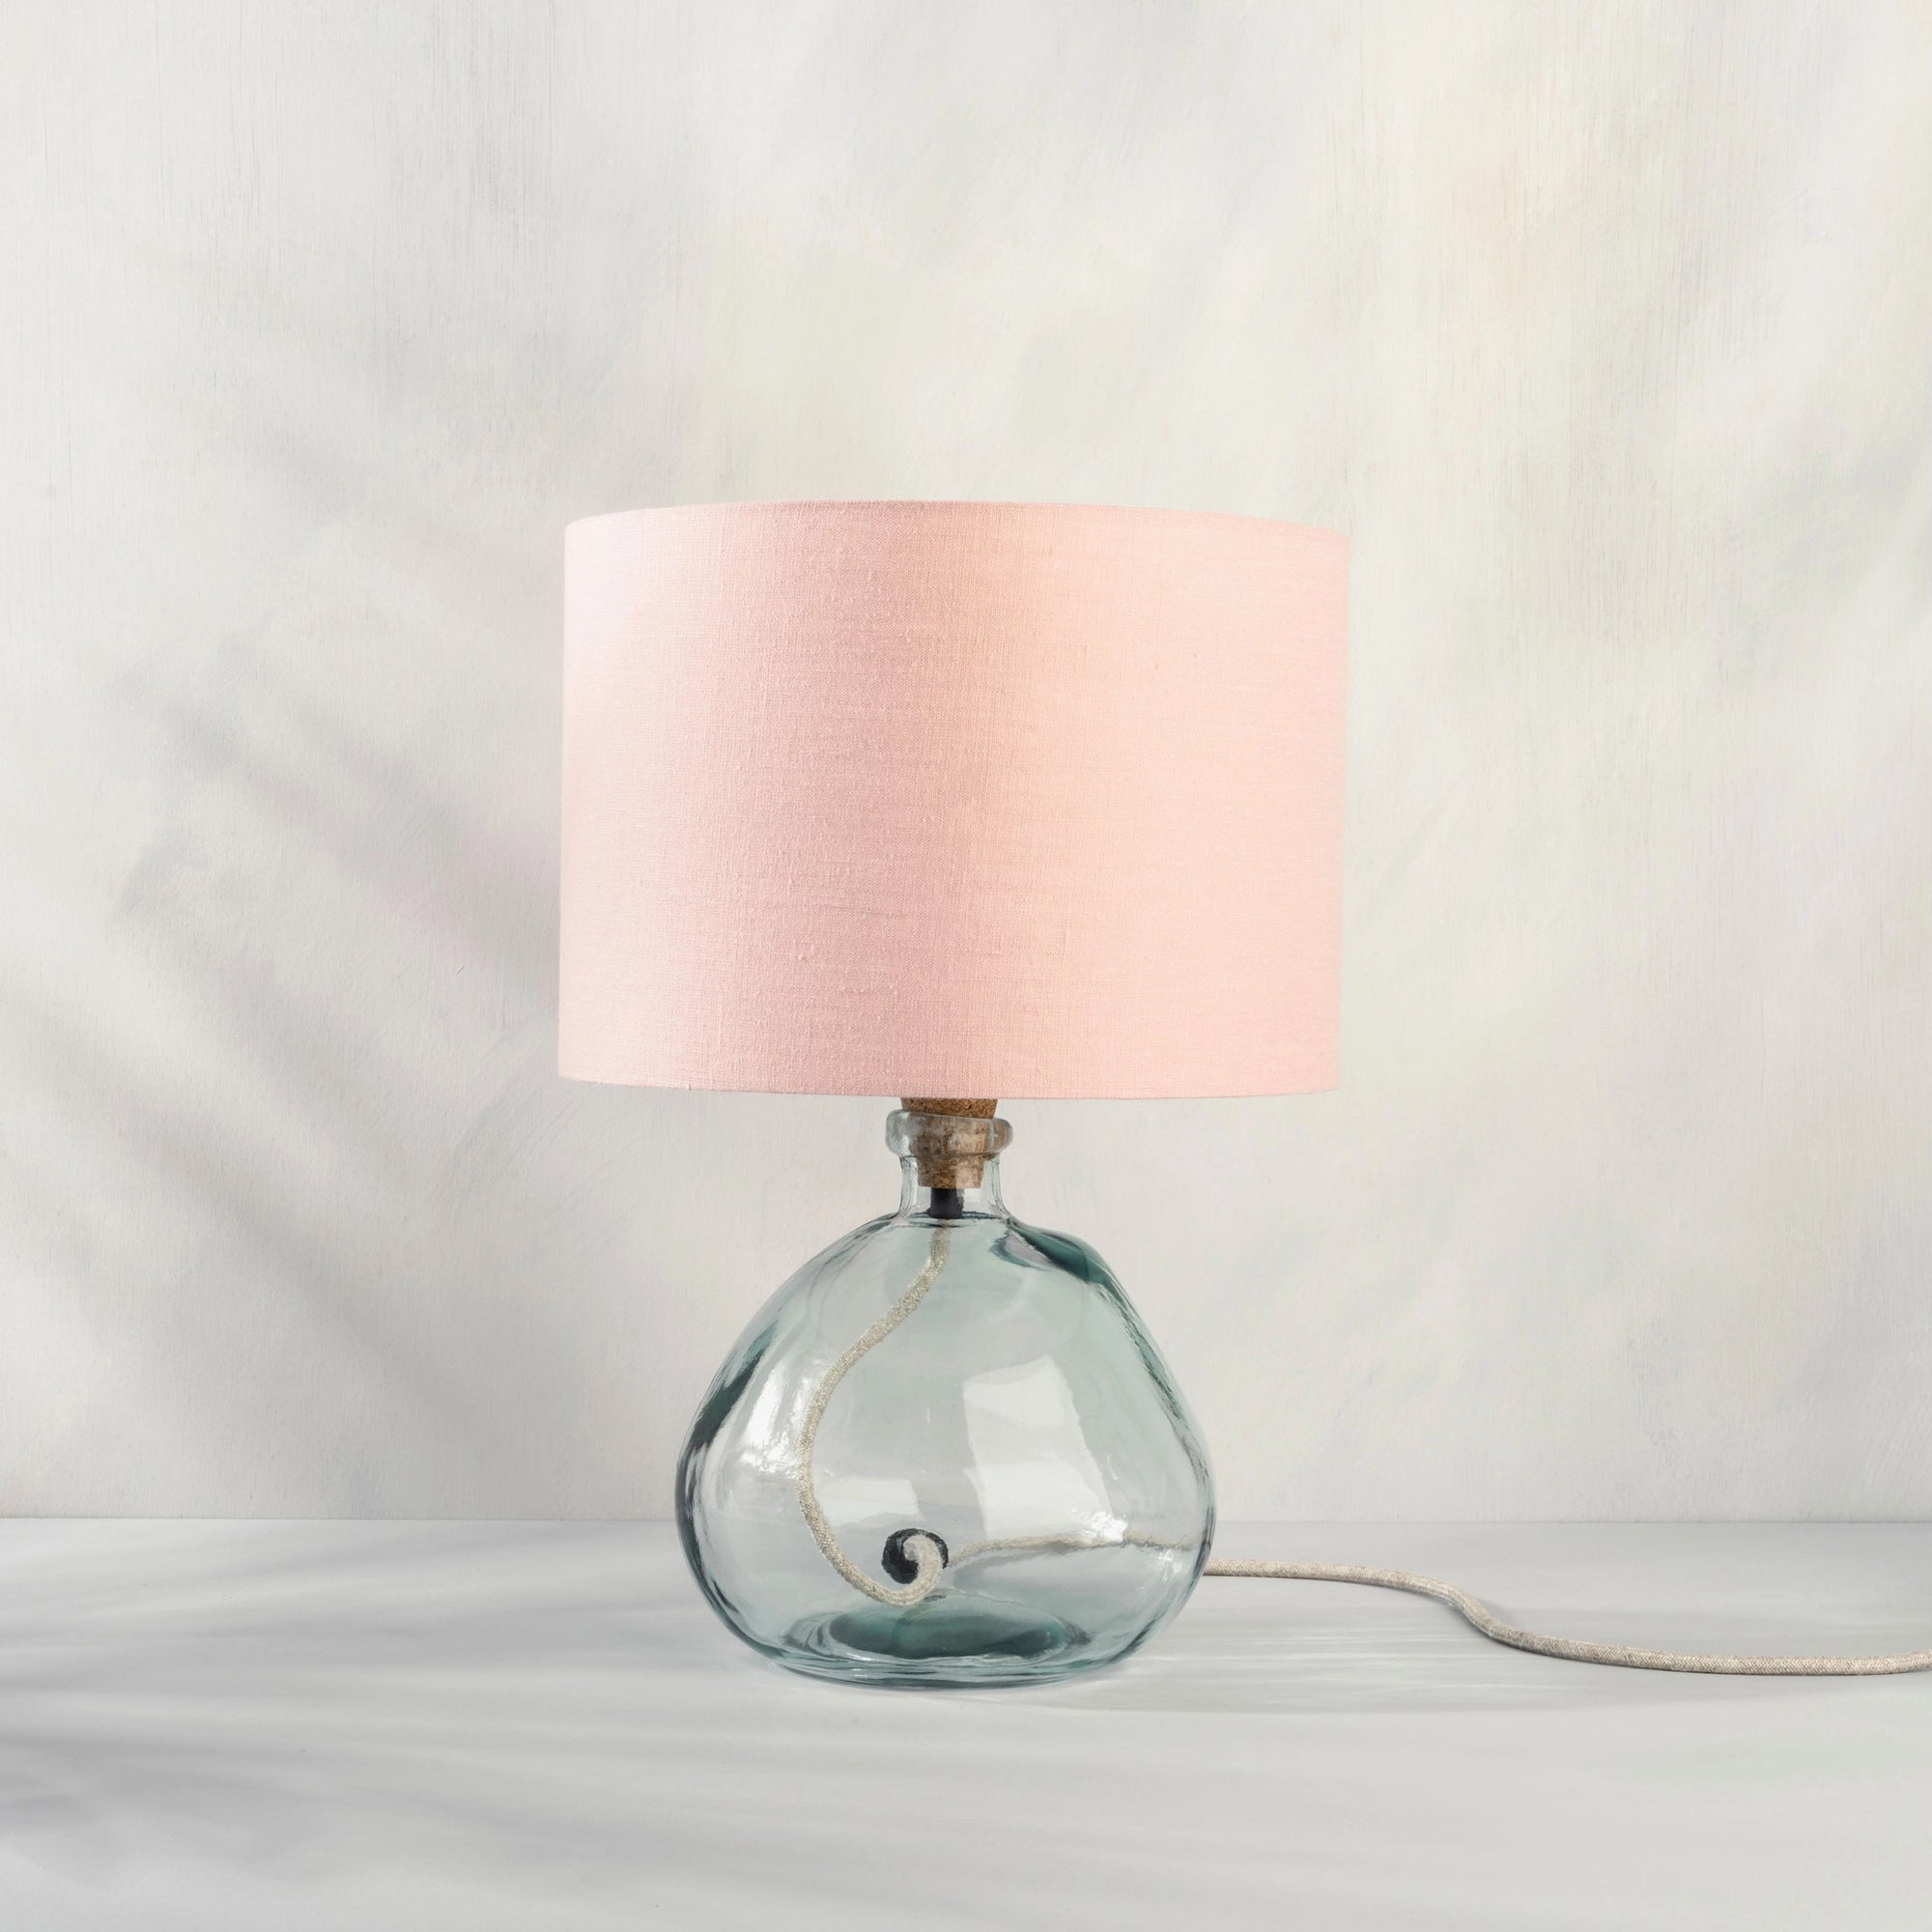 Blush pink table lamp on recycled glass base